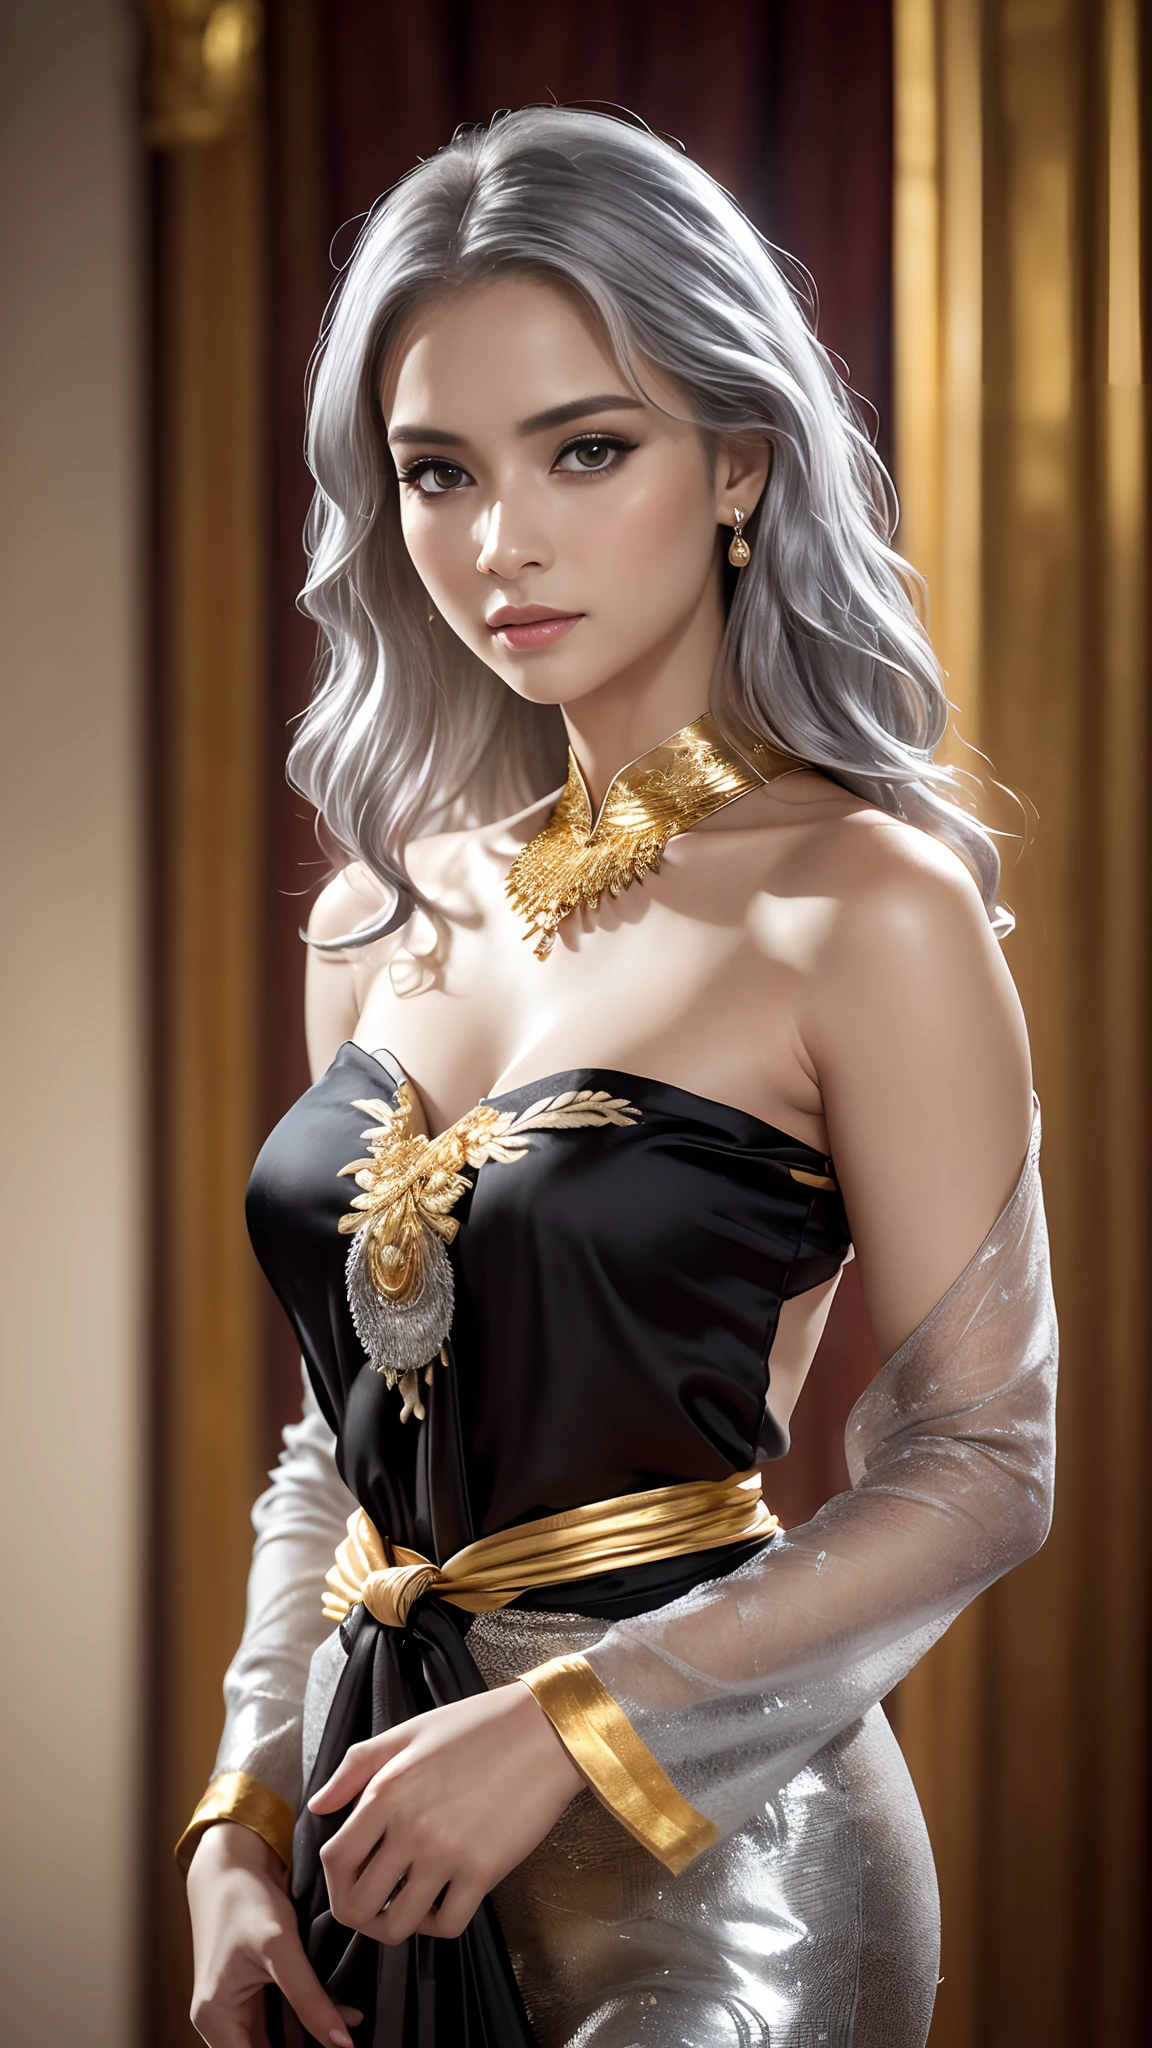 Photorealistic Production, (One Person), (Realistic Image of a 25 Years Old British Female Model), (Shoulder-level Wavy Silver Hair:1.6), (Pale Skin:1.4), (Wearing a Black Ornated Kebaya Dress with Silk Cloth and Golden Jeweleries:1.6), (Serious Face), (Deep Cleavage), (Elegant Pose:1.4), Centered, (Waist-up Shot:1.4), From Front Shot, Insane Details, Intricate Face Detail, Intricate Hand Details, Cinematic Shot and Lighting, Realistic Colors, Masterpiece, Sharp Focus, Ultra Detailed, Taken with DSLR camera, Realistic Photography, Depth of Field, Incredibly Realistic Environment and Scene, Master Composition and Cinematography